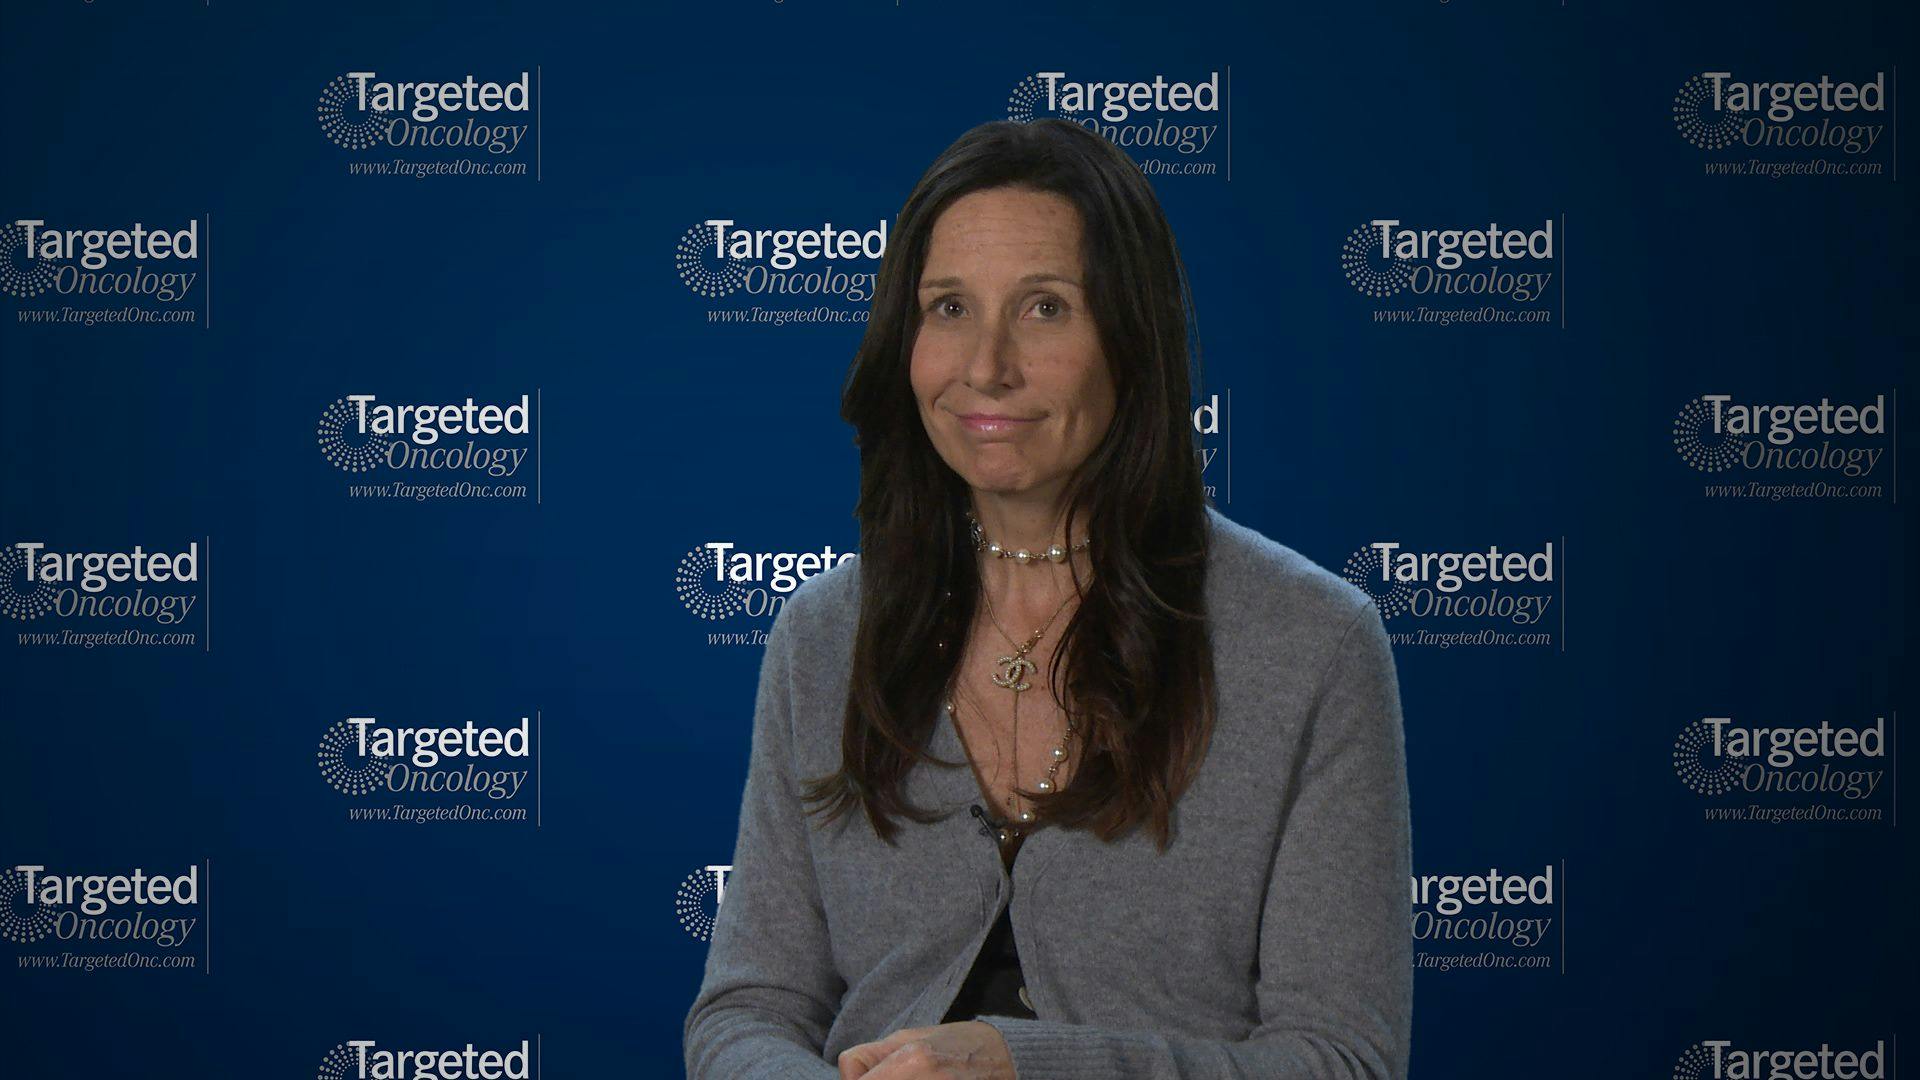 Monoclonal Antibodies in Relapsed Multiple Myeloma with Cristina Gasparetto, MD: Case 2